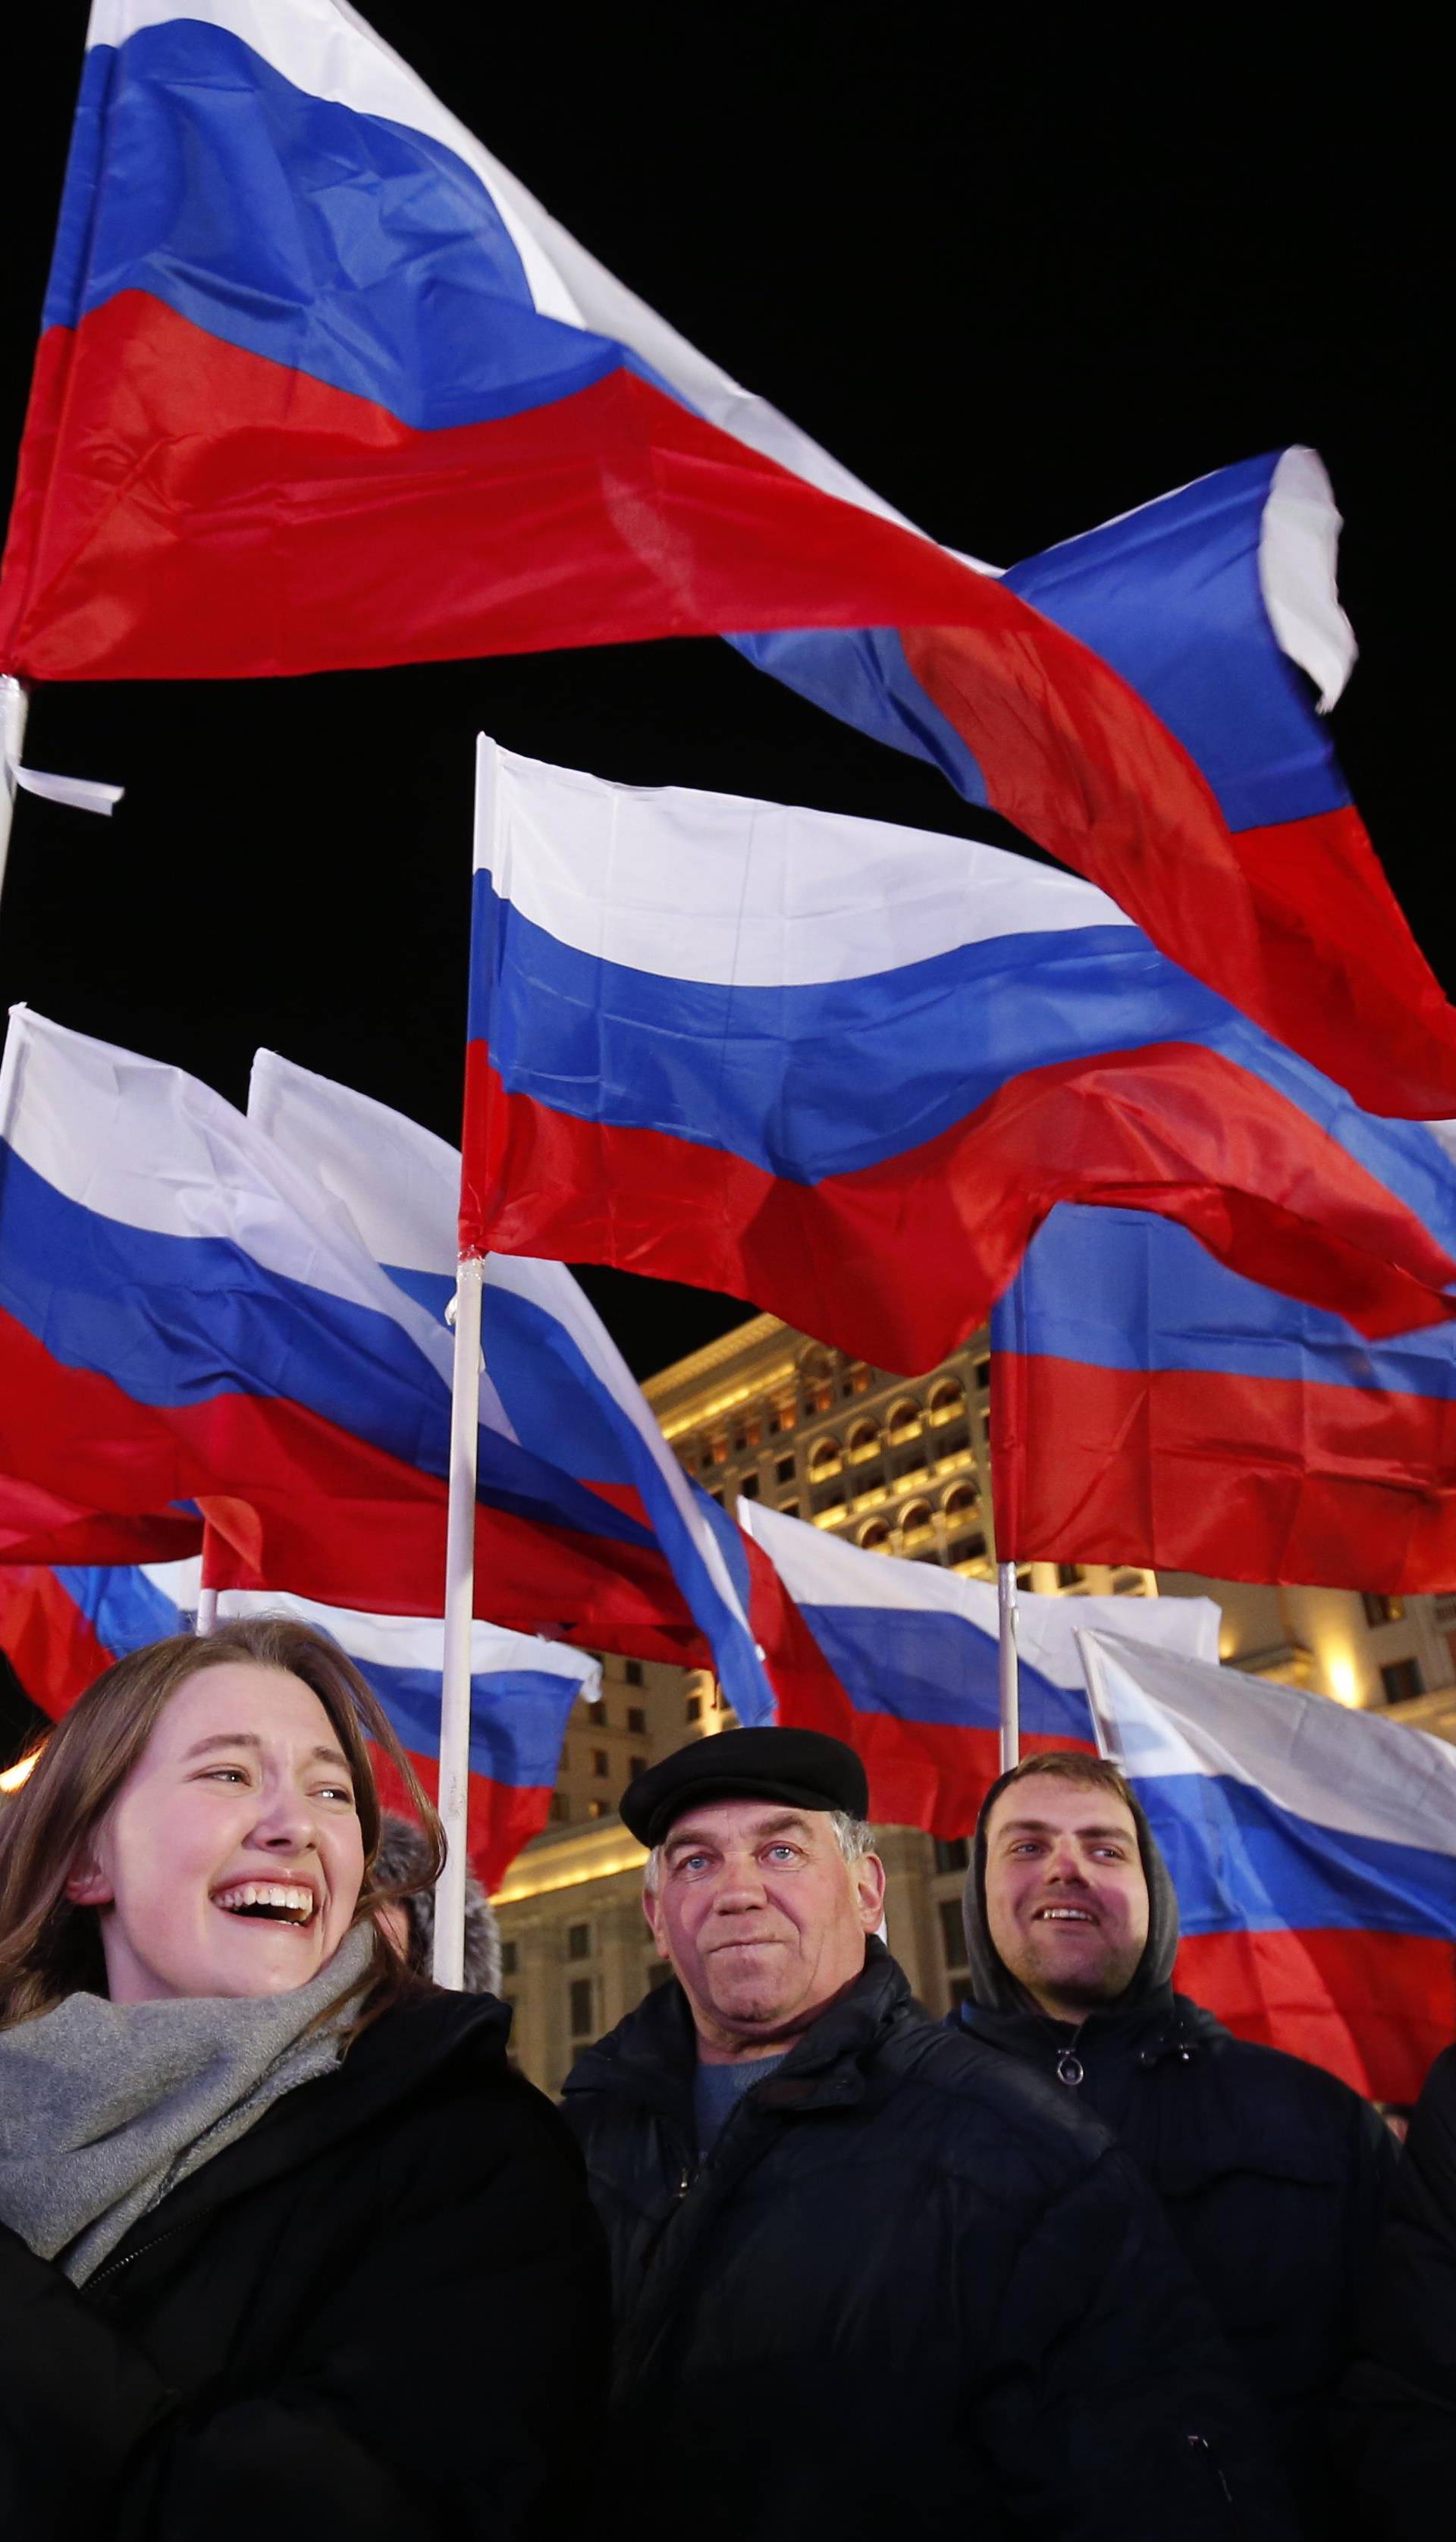 People wave Russian flags during a rally and concert marking the fourth anniversary of Russia's annexation of the Crimea region, at Manezhnaya Square in central Moscow